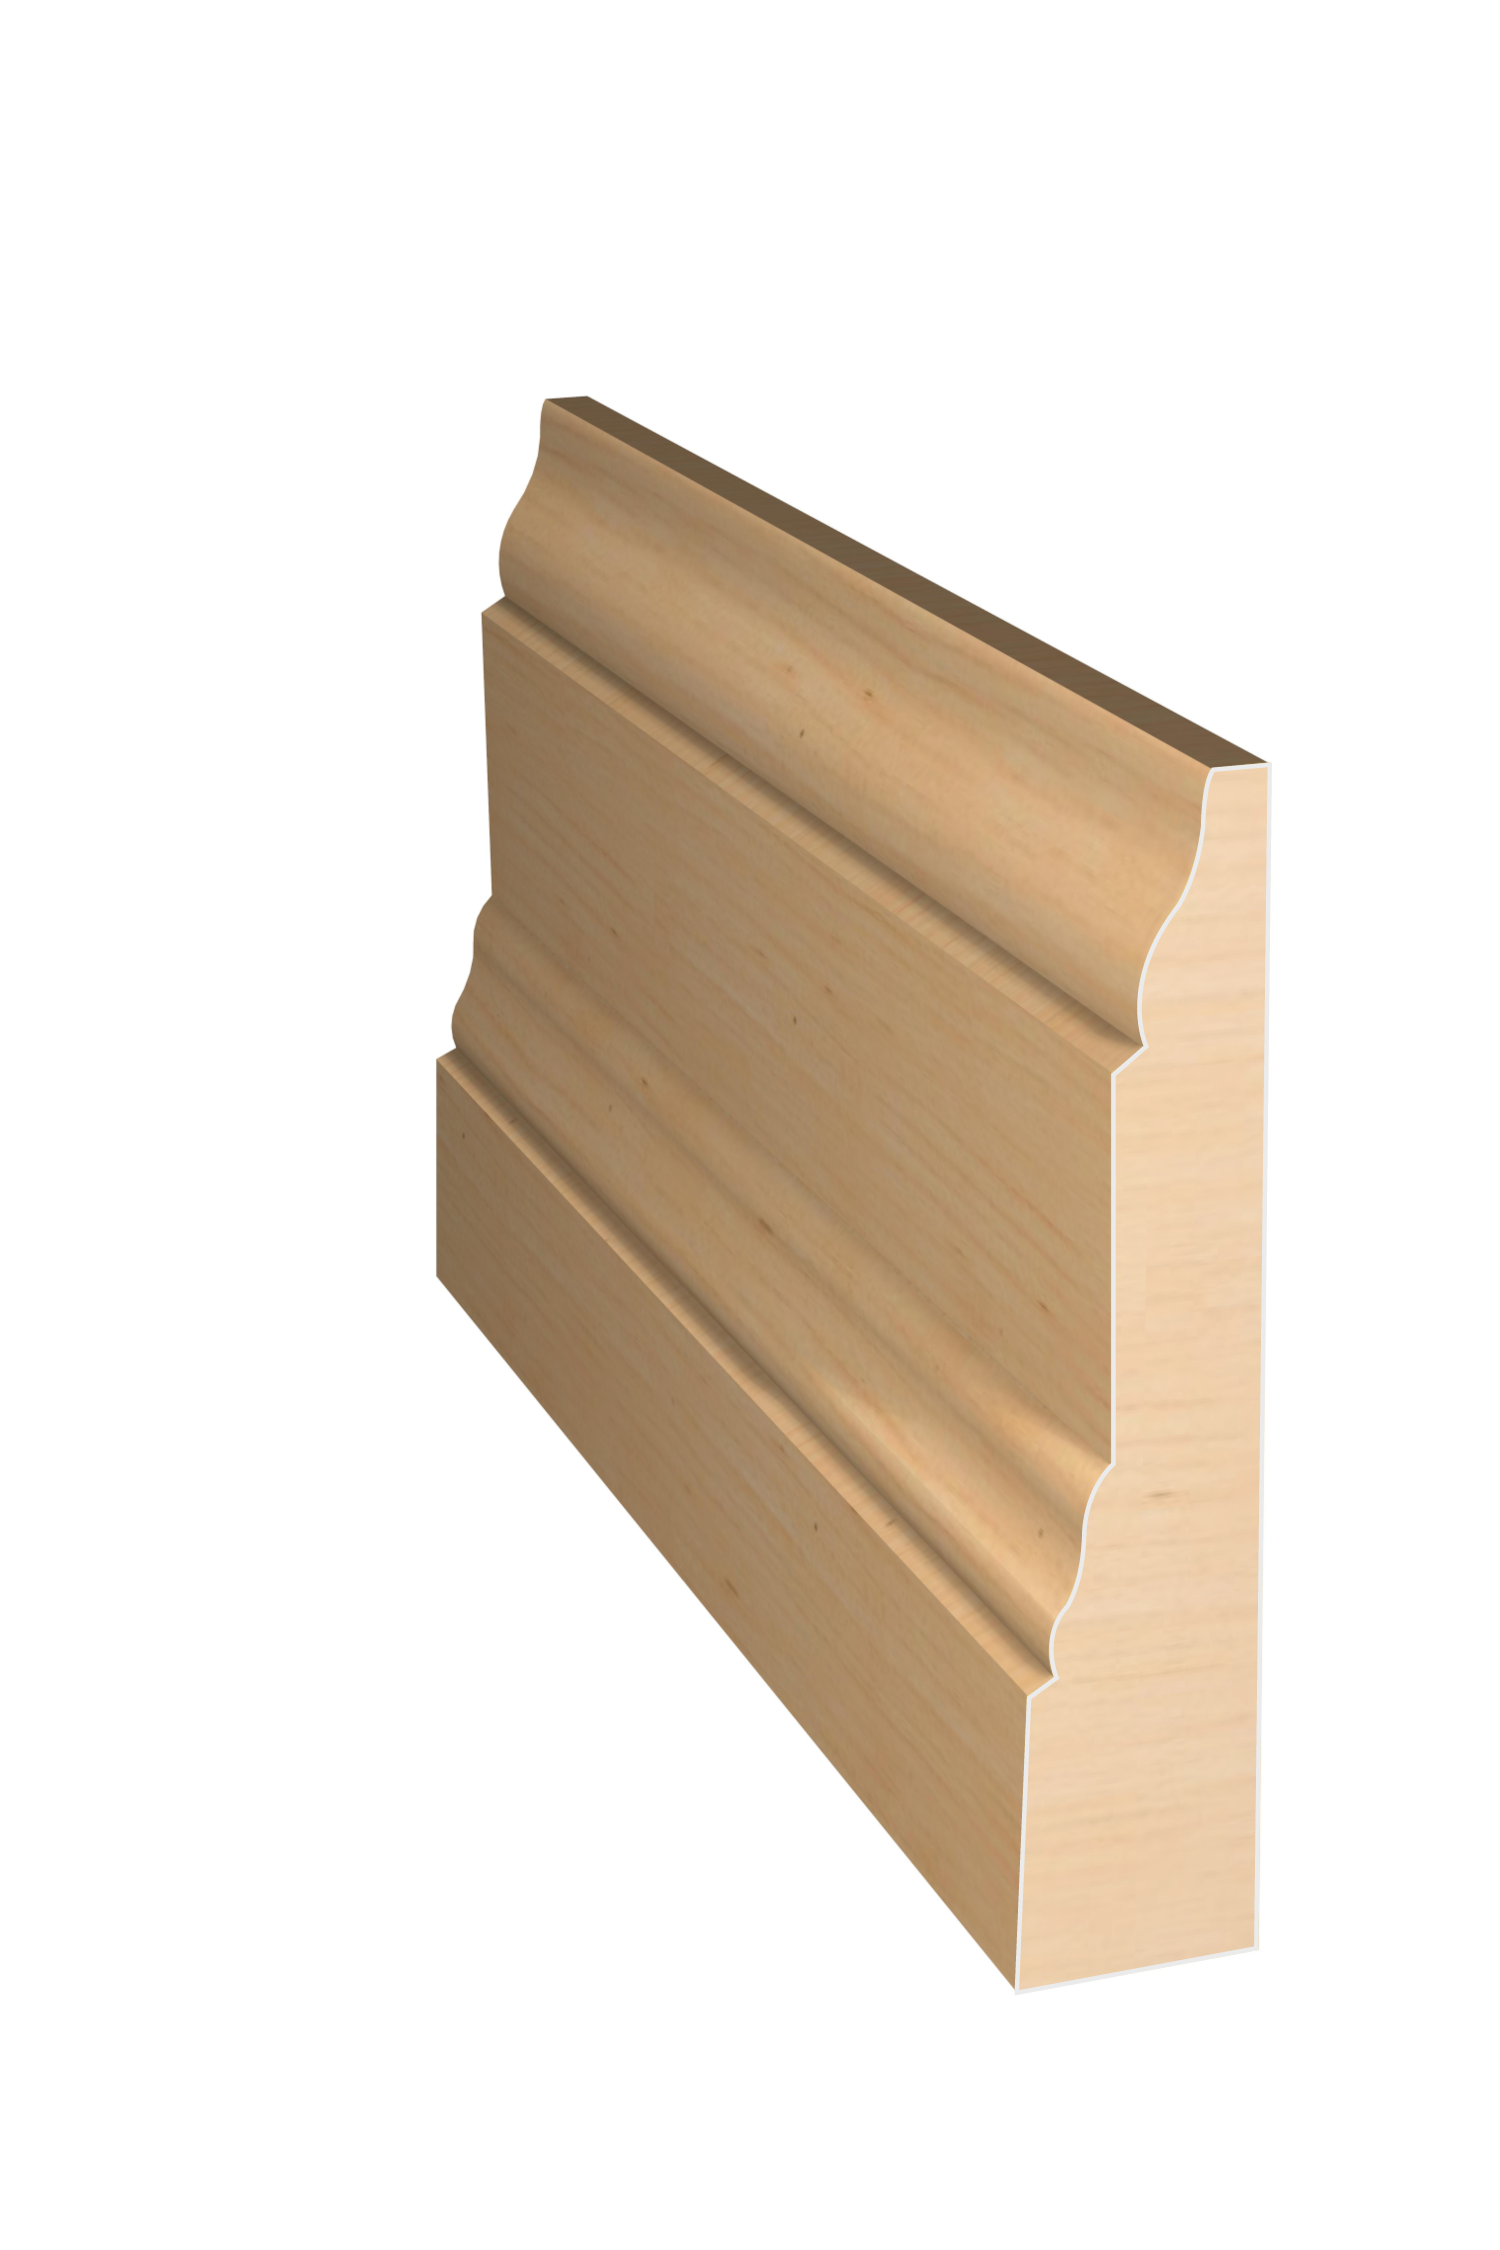 Three dimensional rendering of custom casing wood molding CAPL31411 made by Public Lumber Company in Detroit.